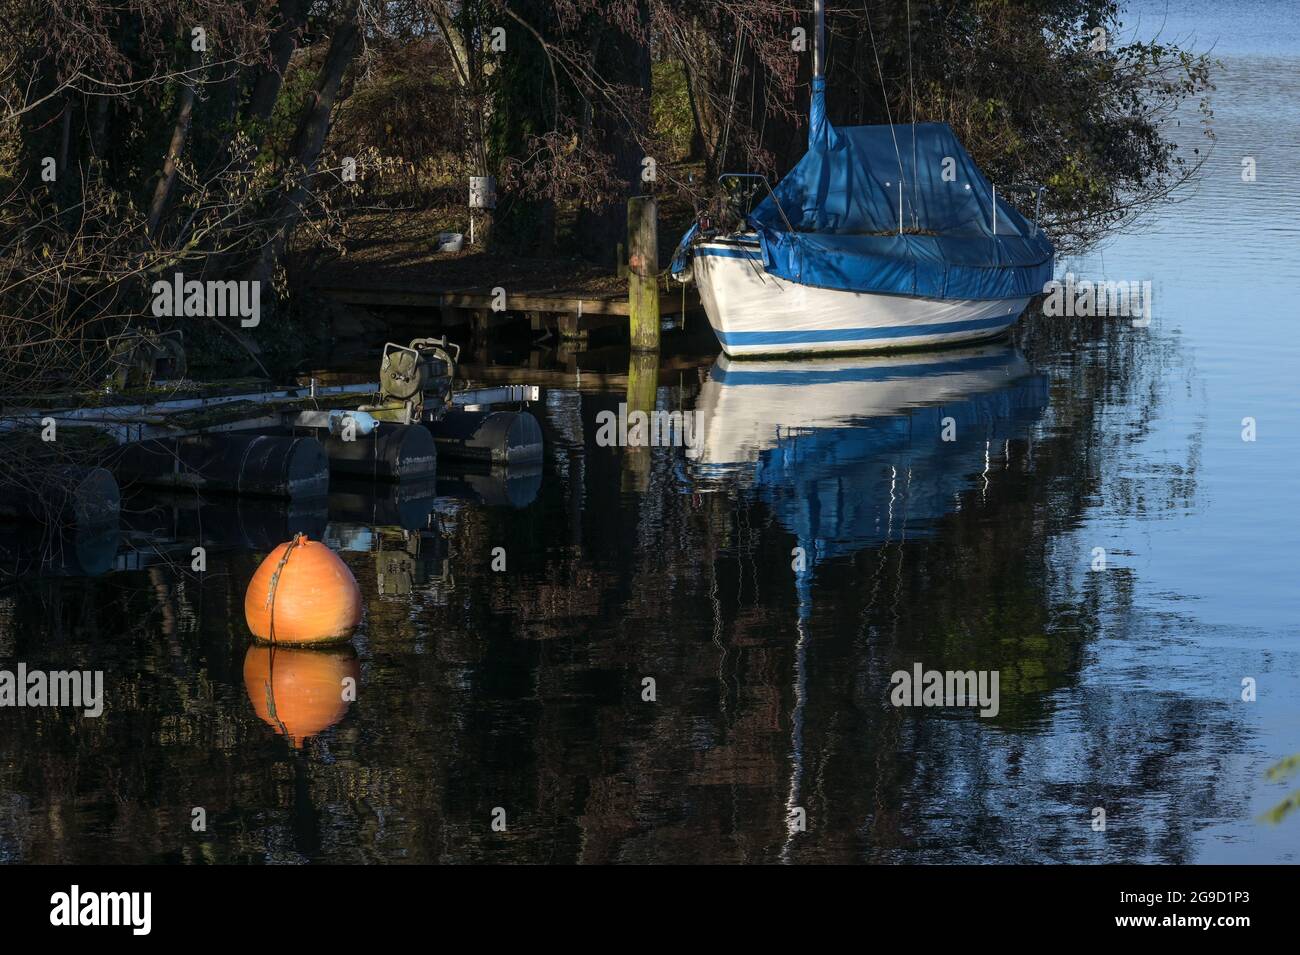 Covered sail boat with blue tarpaulin and an orange buoy in the lake at the shore, leisure activity concept, copy space, selected focus, narrow depth Stock Photo